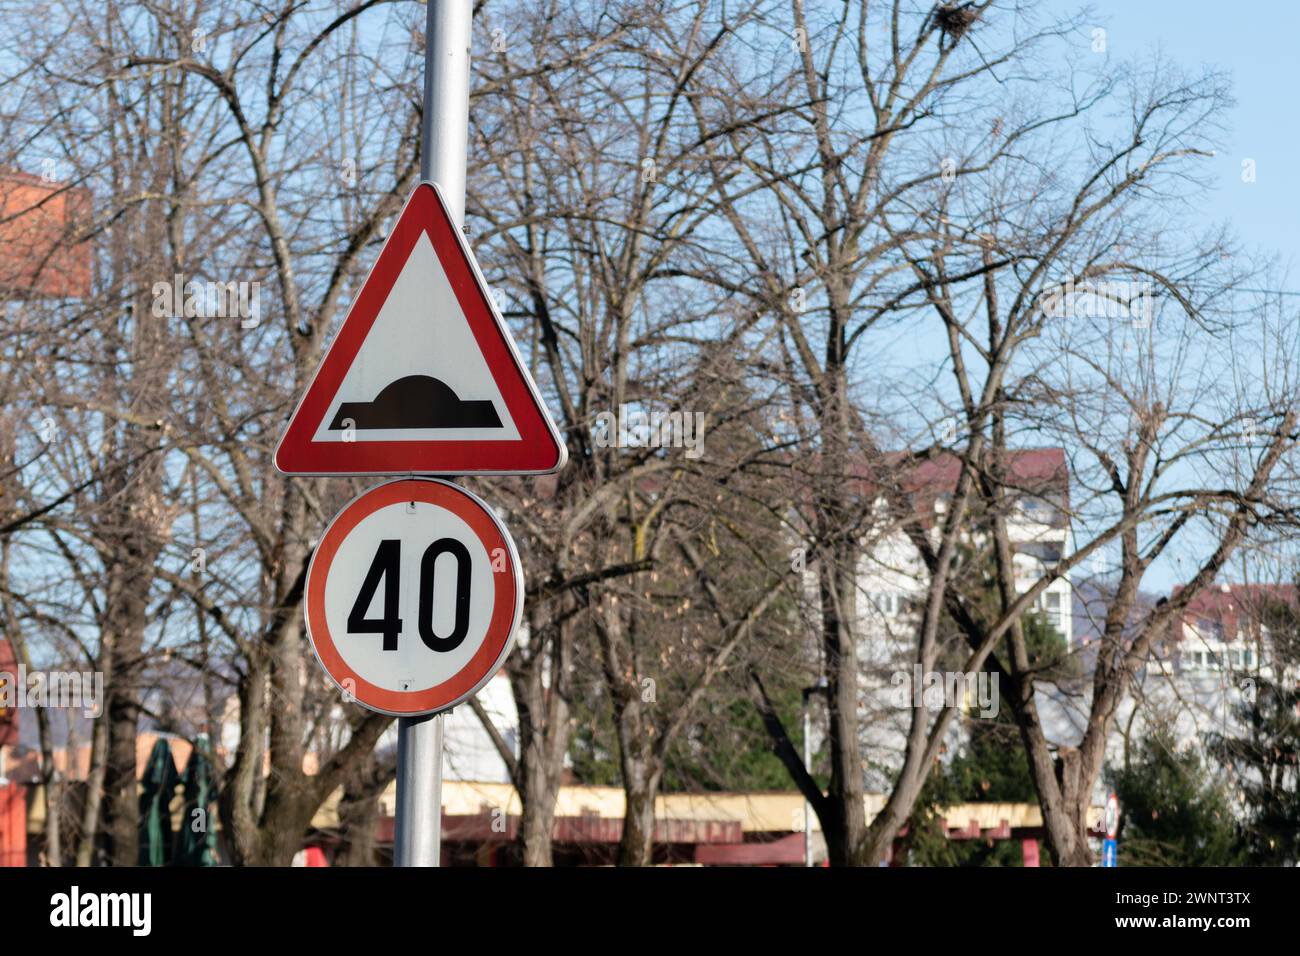 Traffic signs close up, speed bump or bumpy road and speed limit 40 km/h Stock Photo